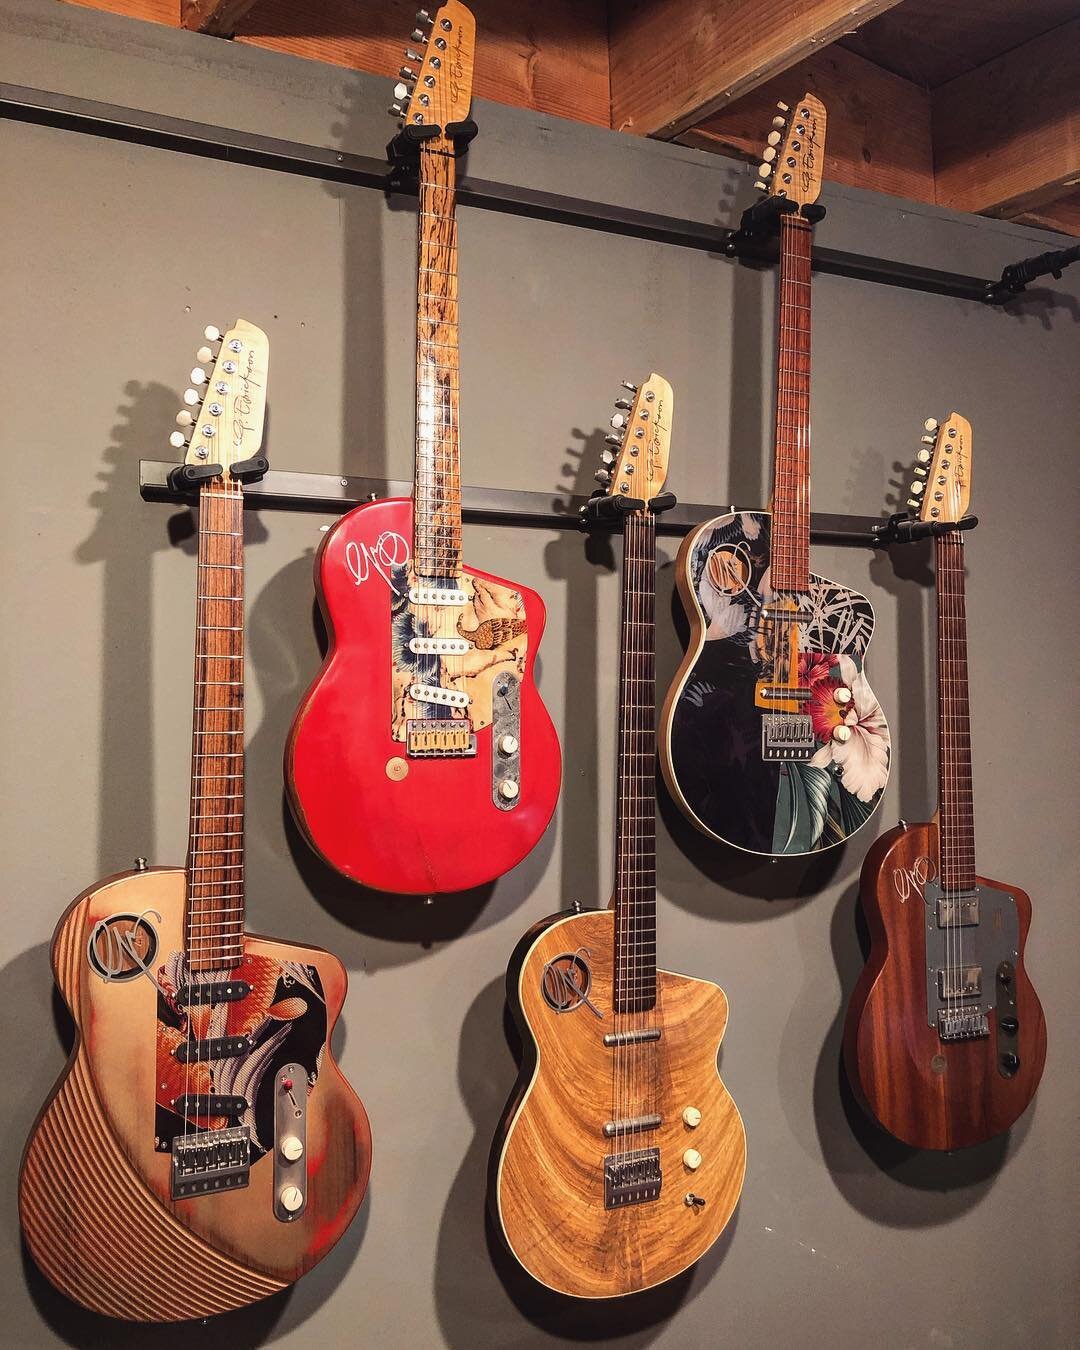 We are ready LA! 
We will be bringing these five guitars for anyone to play or purchase (except for @grey.bear.music &lsquo;s Red Goose) We can&rsquo;t wait to hear the tone that you all pull out of these✔️🎶. Don&rsquo;t forget to RSVP if you haven&